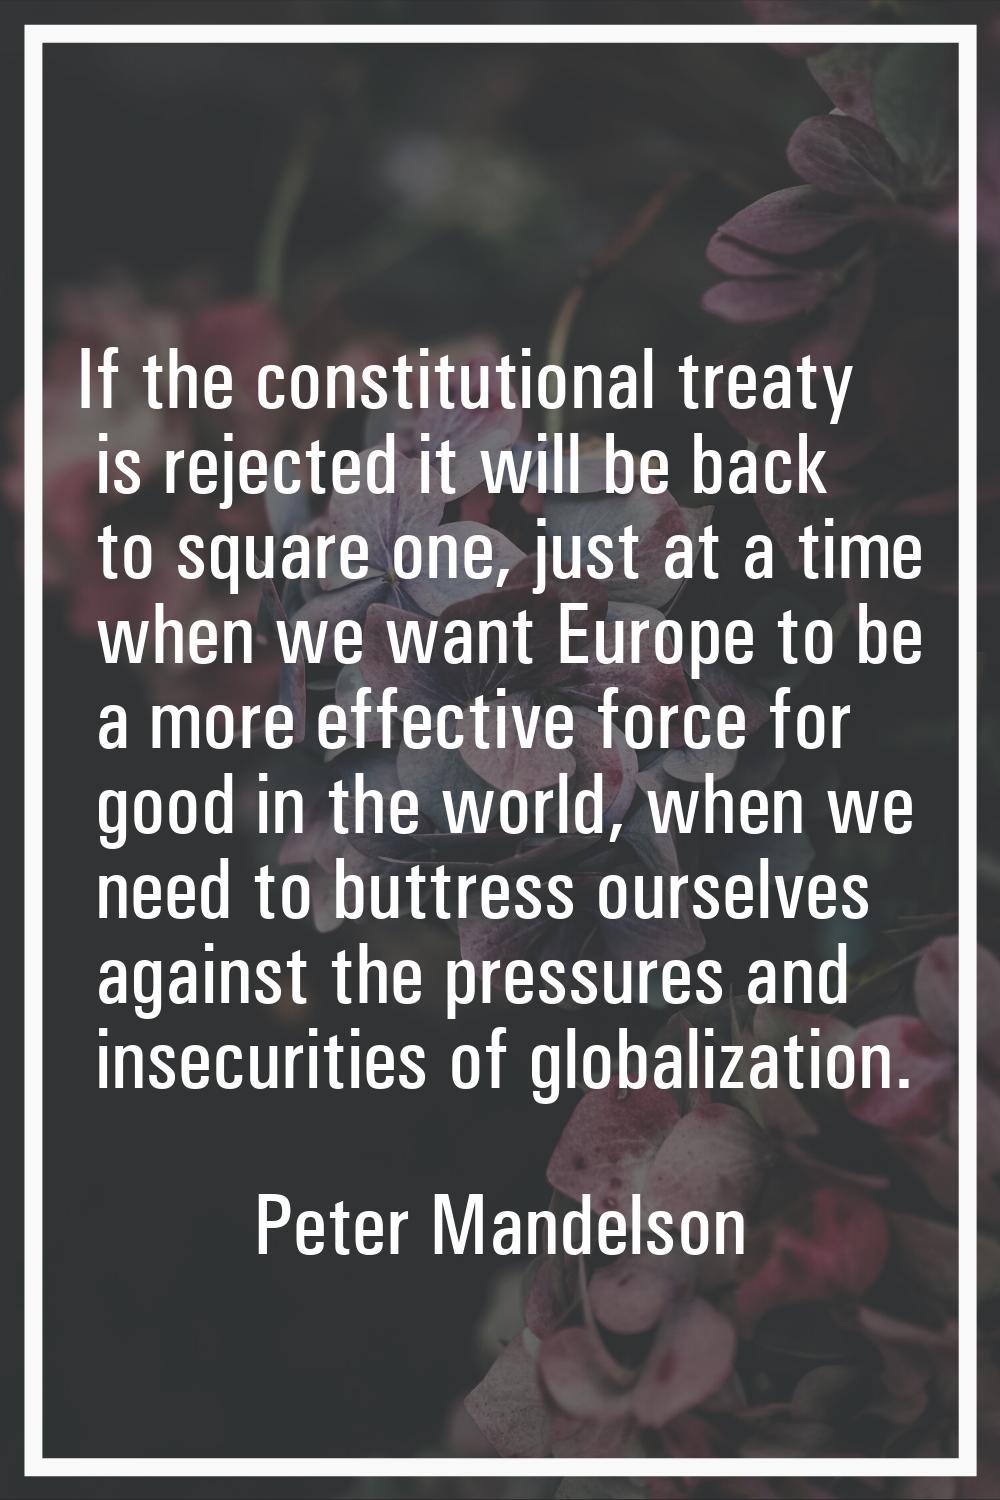 If the constitutional treaty is rejected it will be back to square one, just at a time when we want